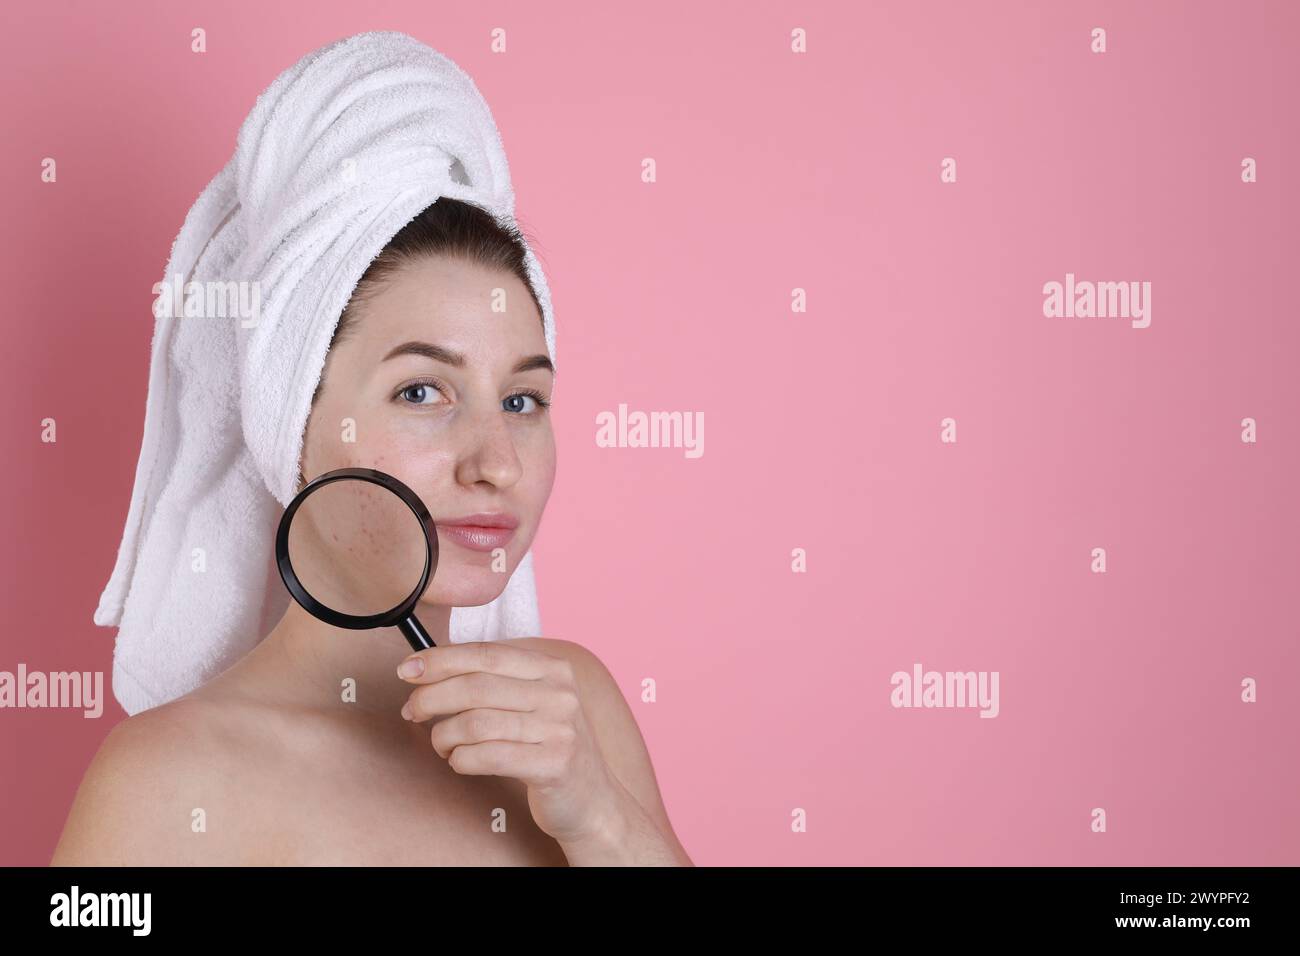 Young woman with acne problem holding magnifying glass near her skin on ...